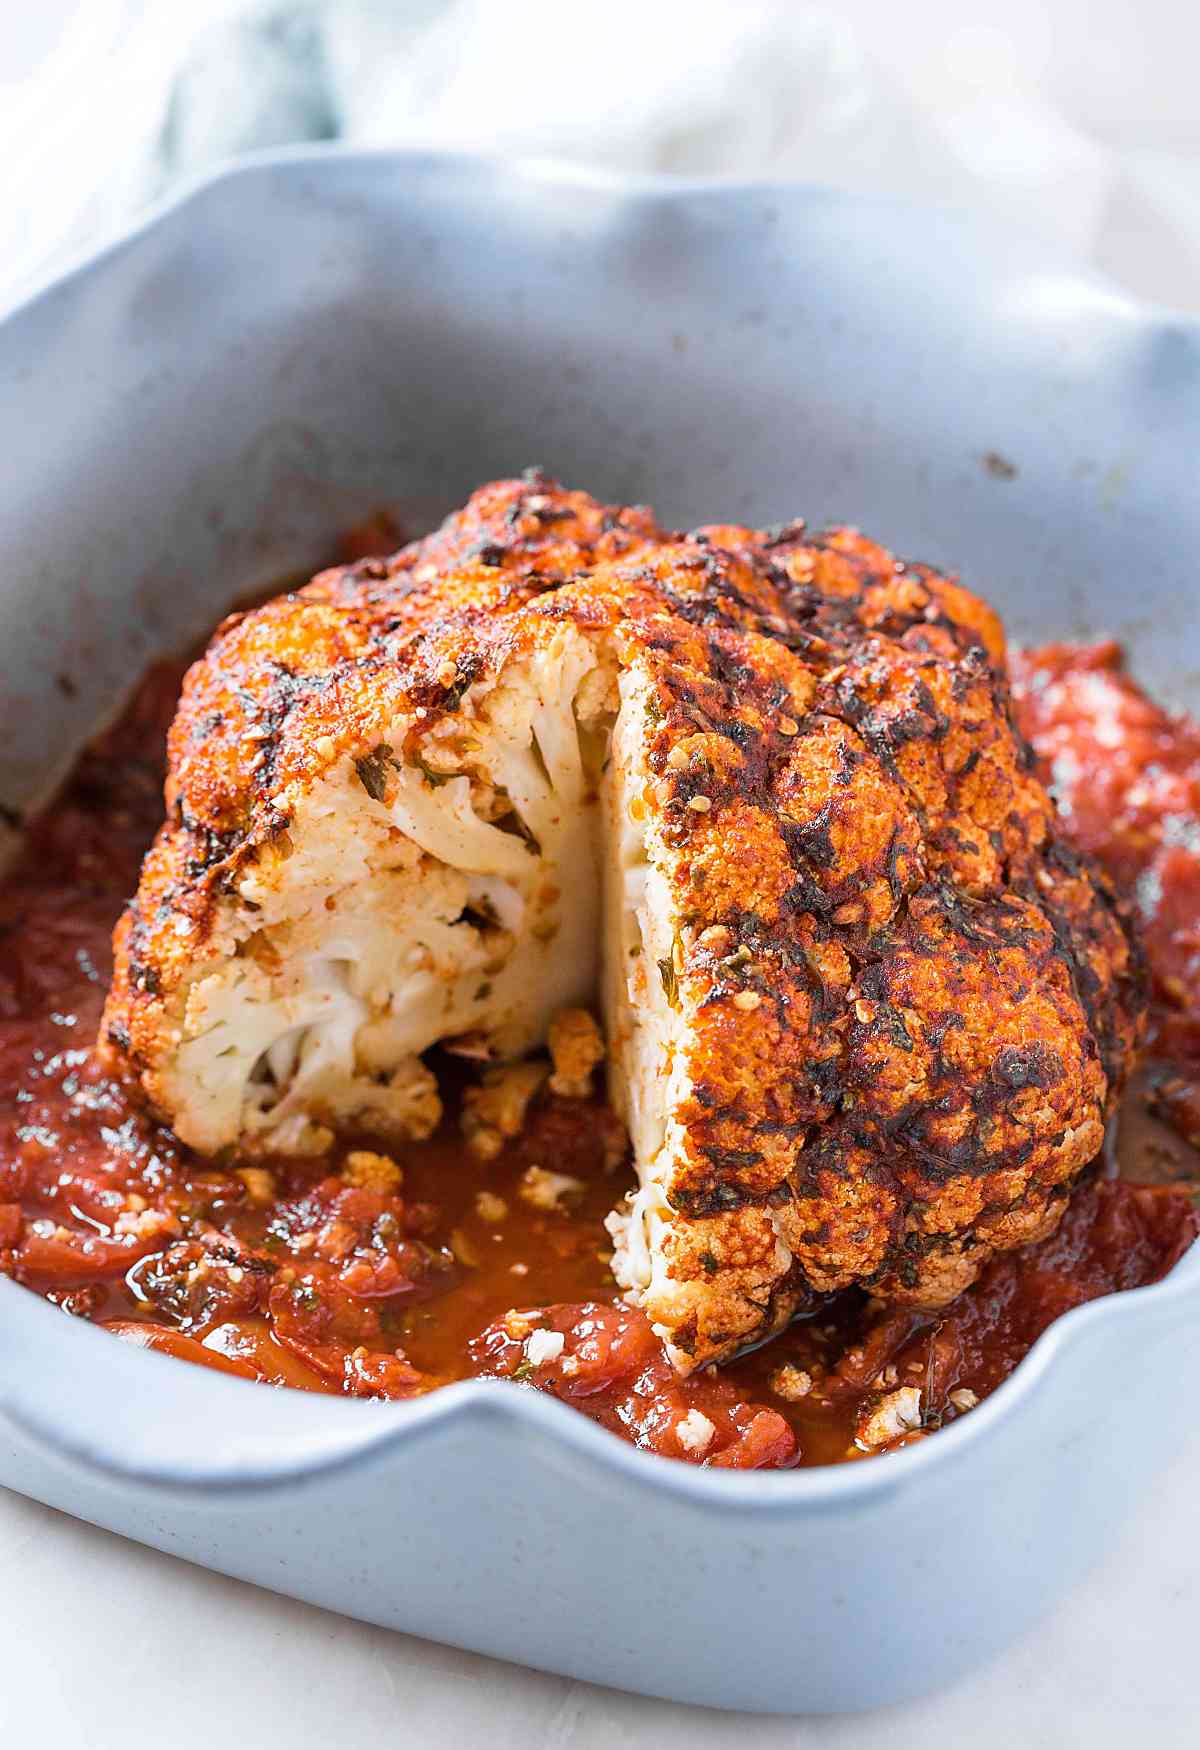 Whole roasted cauliflower with tomato and herbs in baking dish.